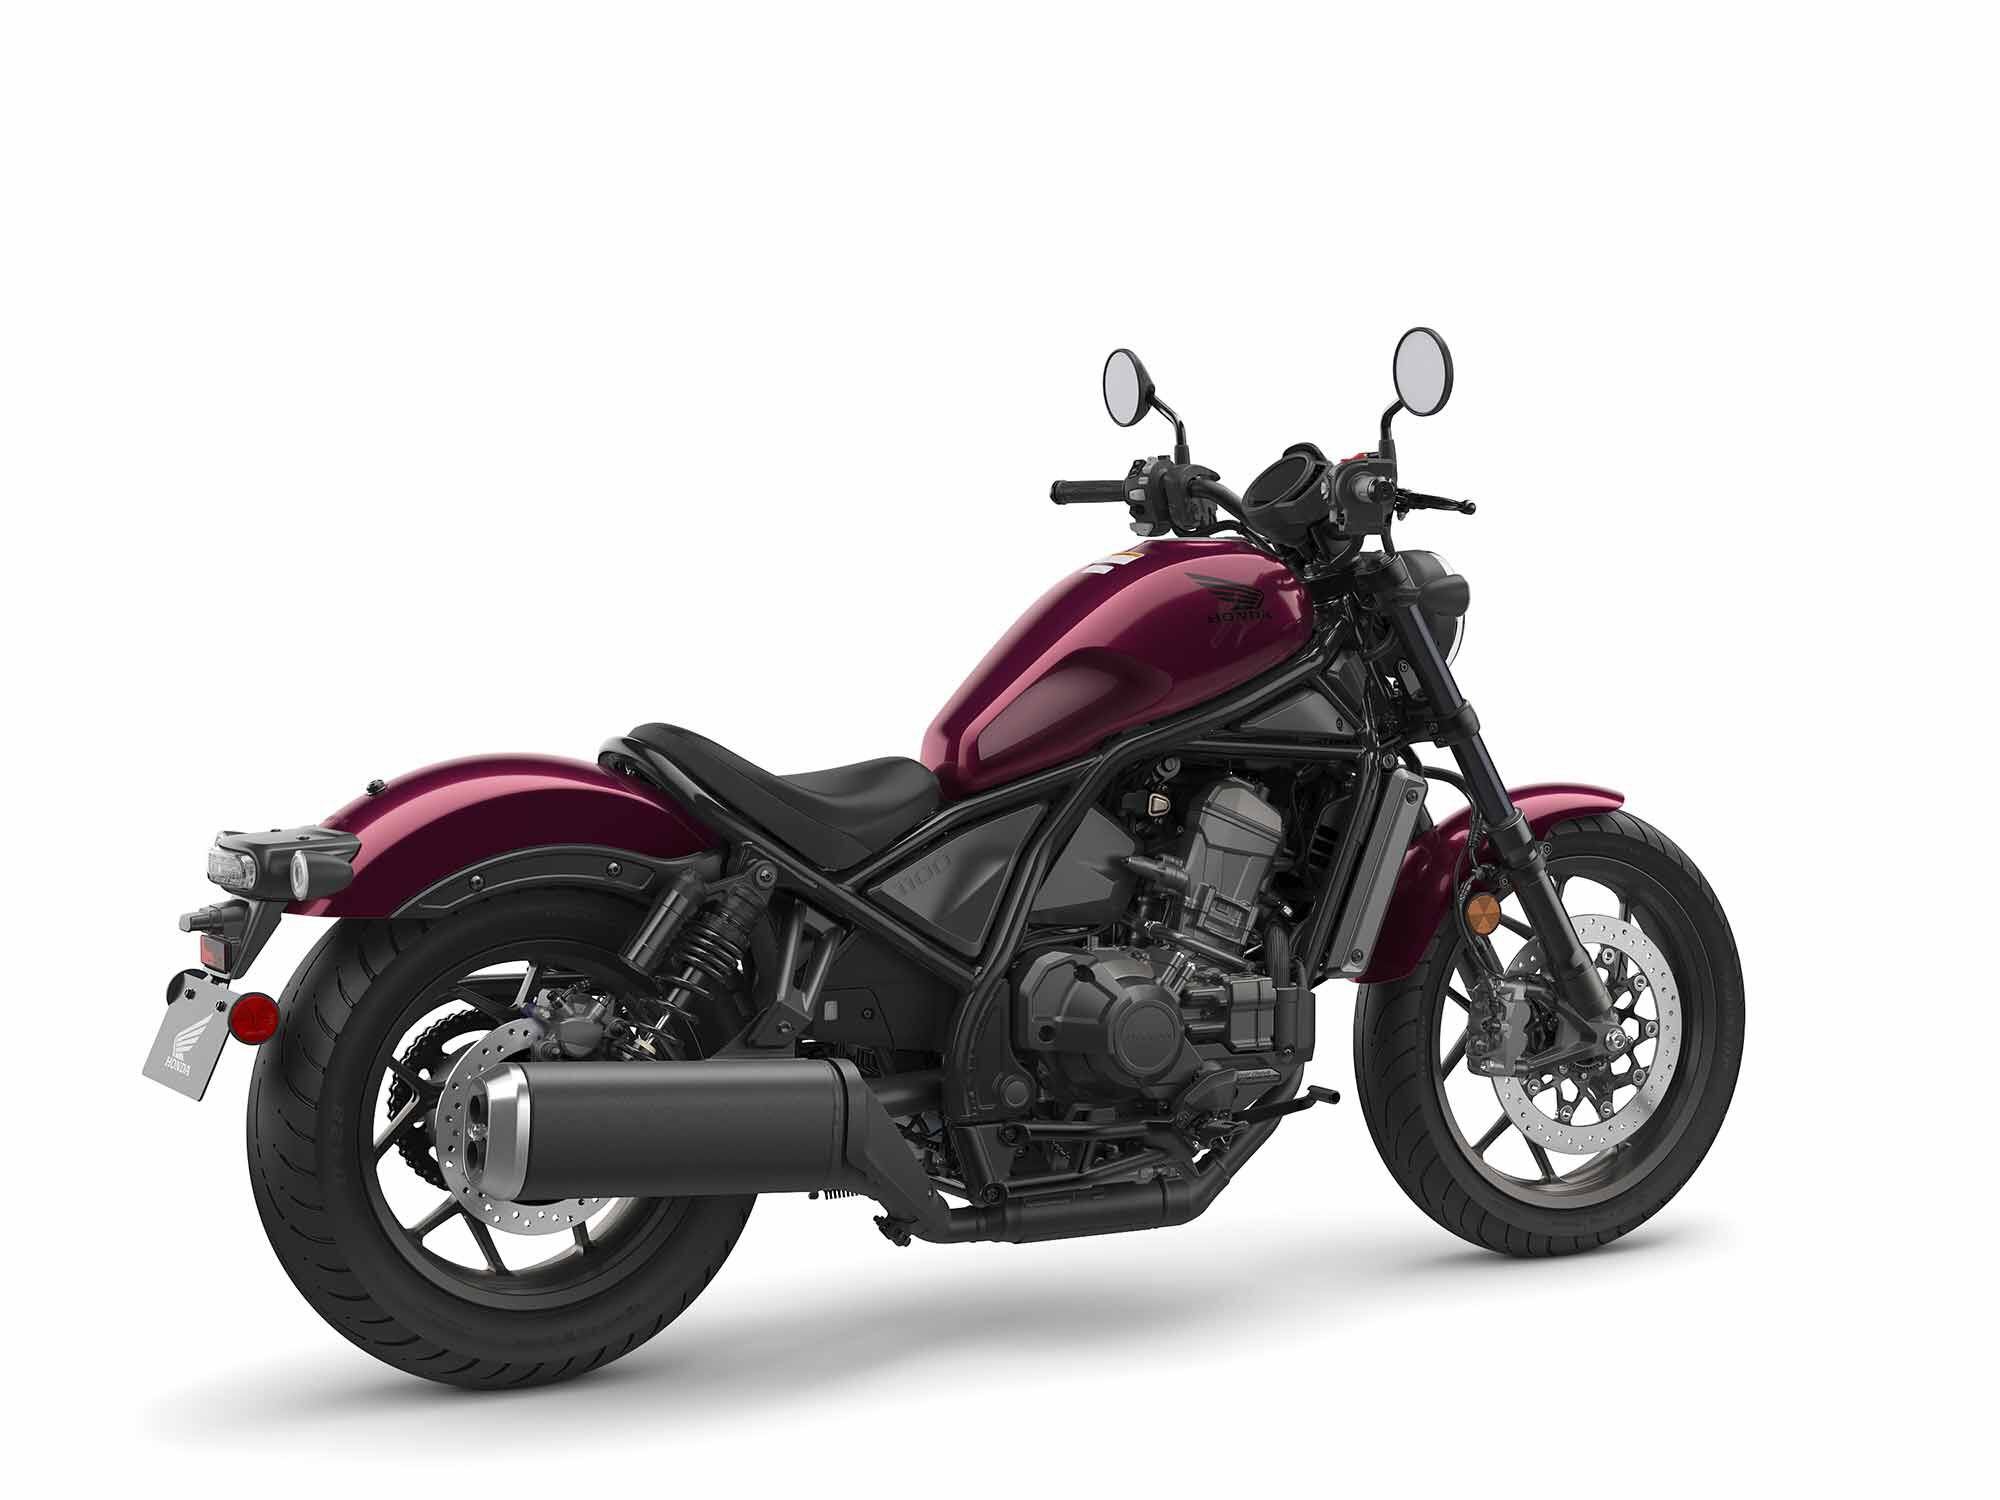 The Honda Rebel should be available beginning in January.